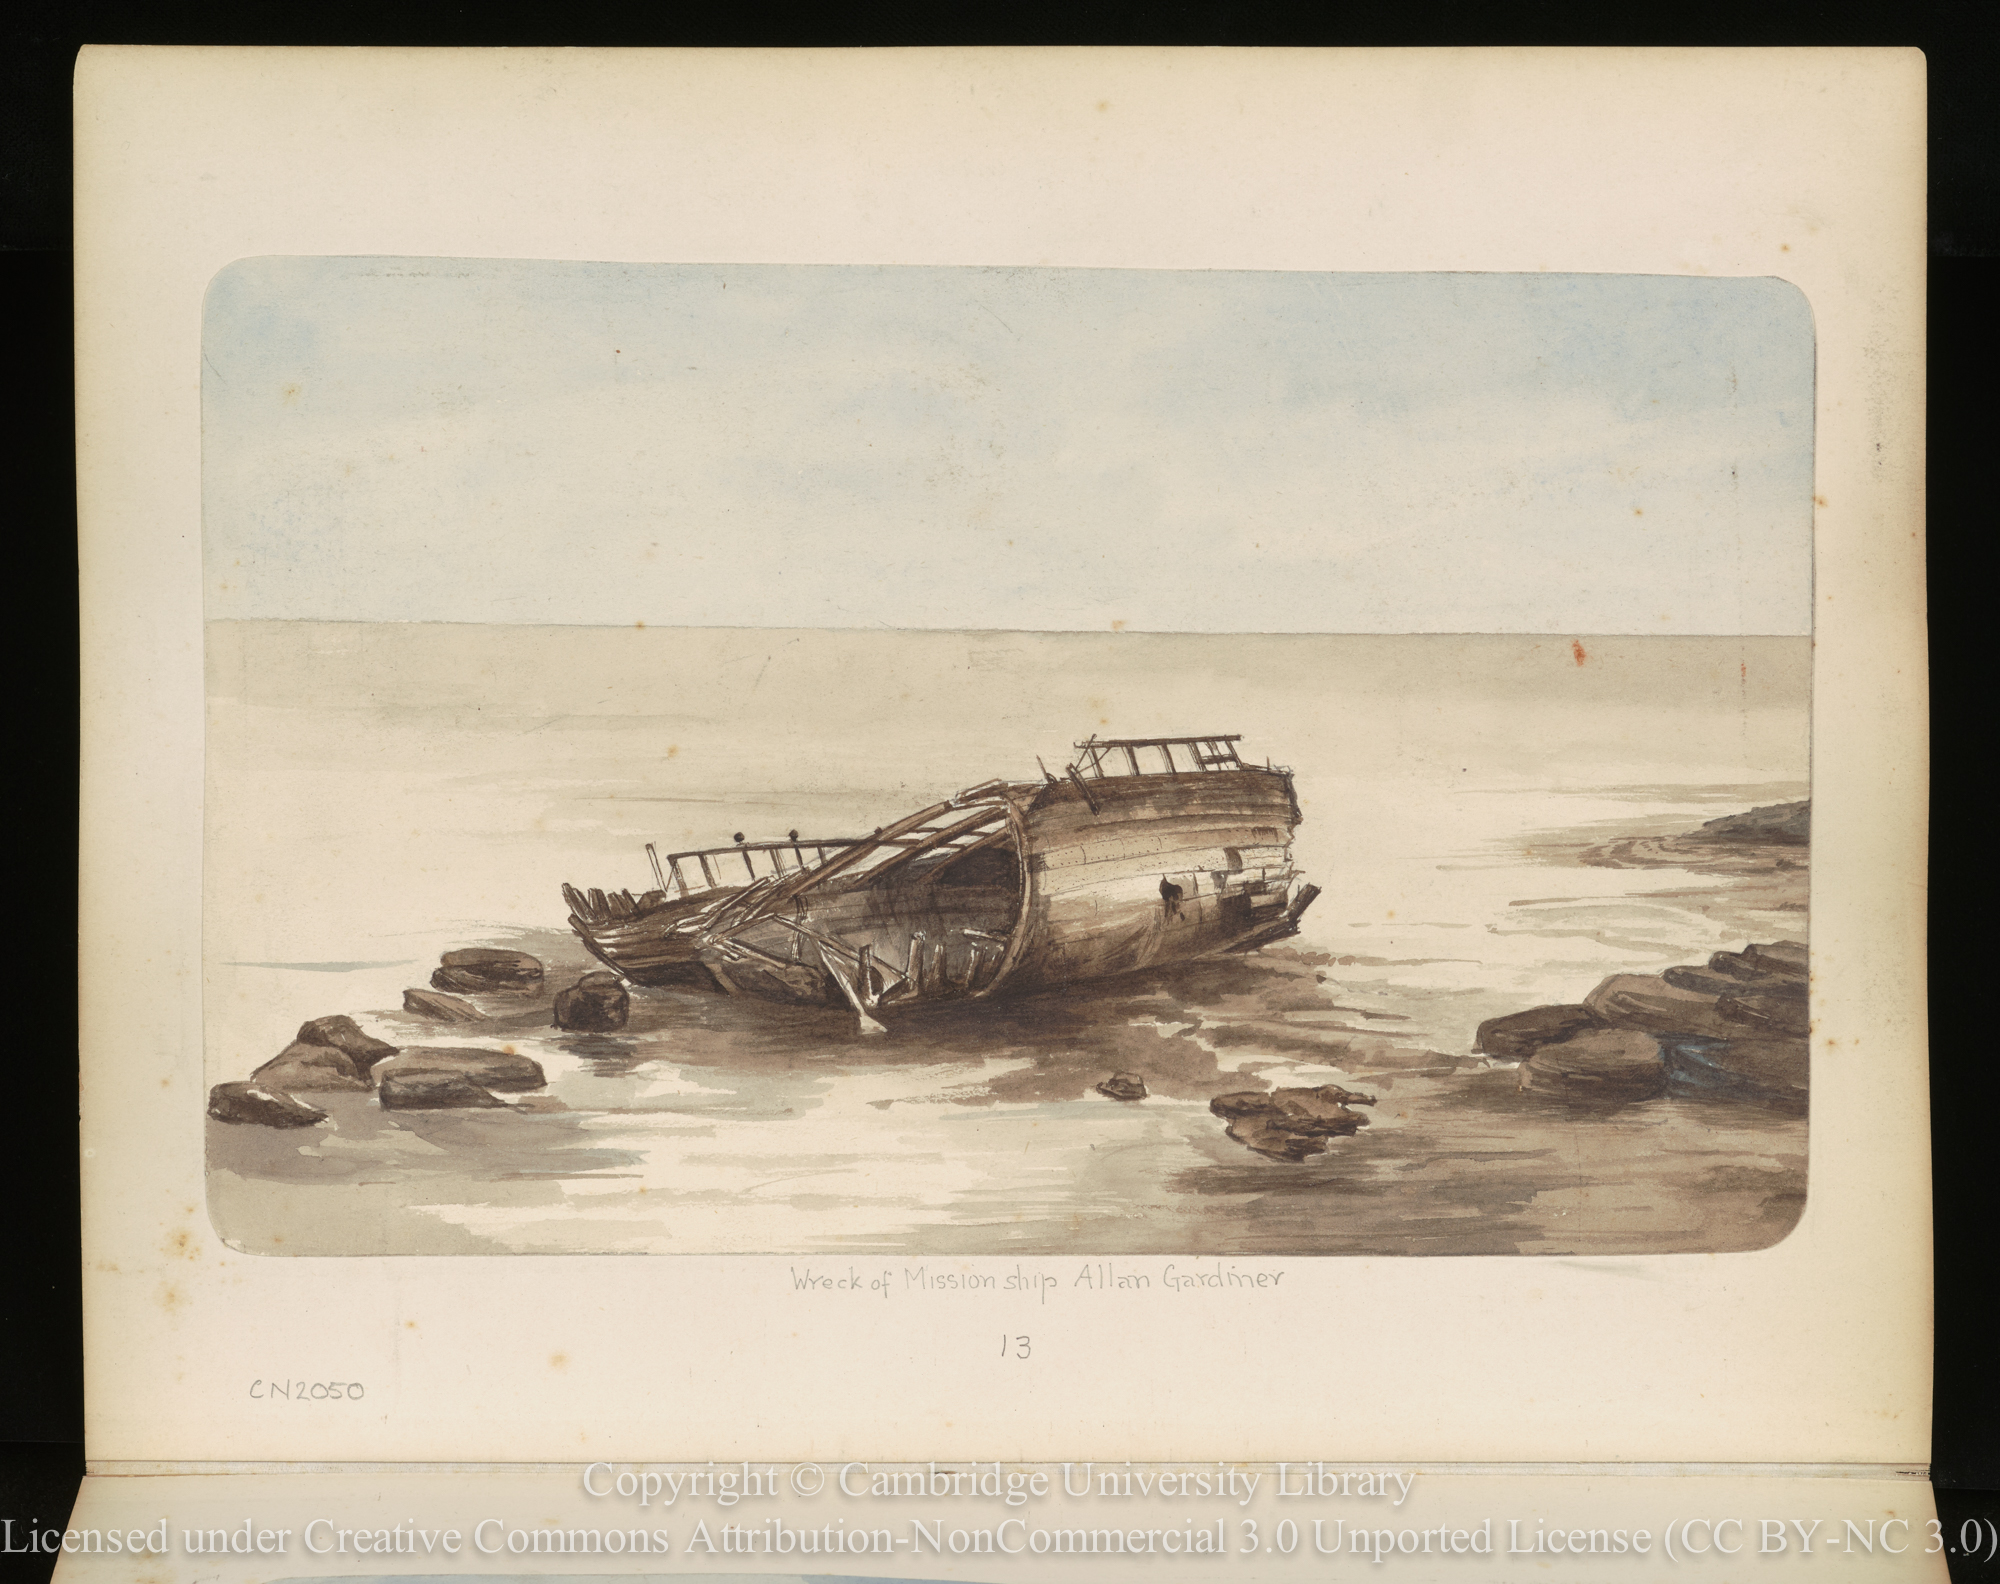 Wreck of the Mission ship Allan [sic] Gardiner